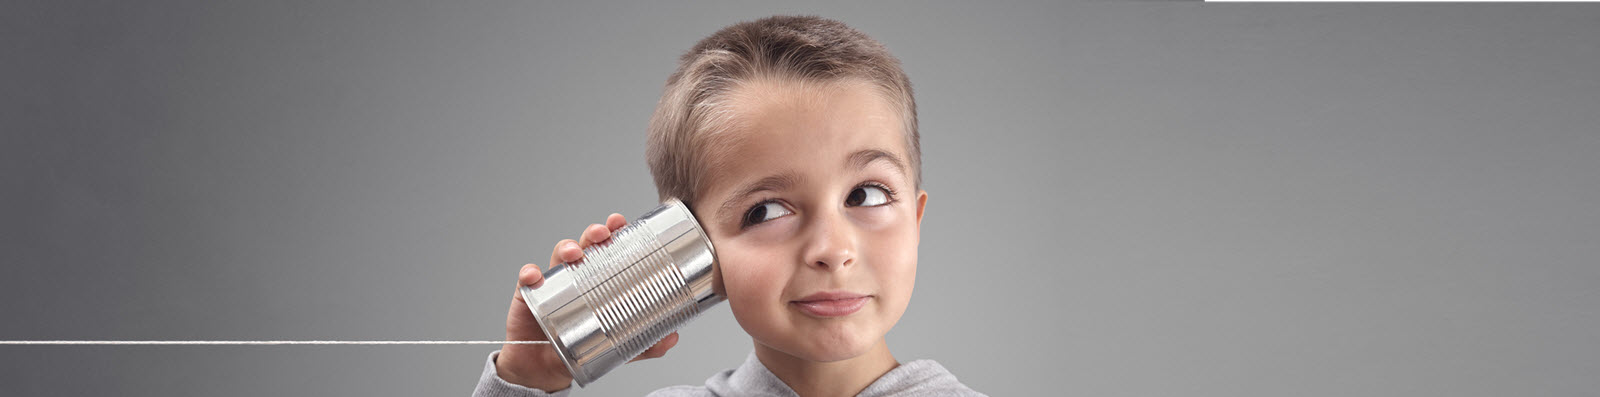 boy listening into a metal can with a string